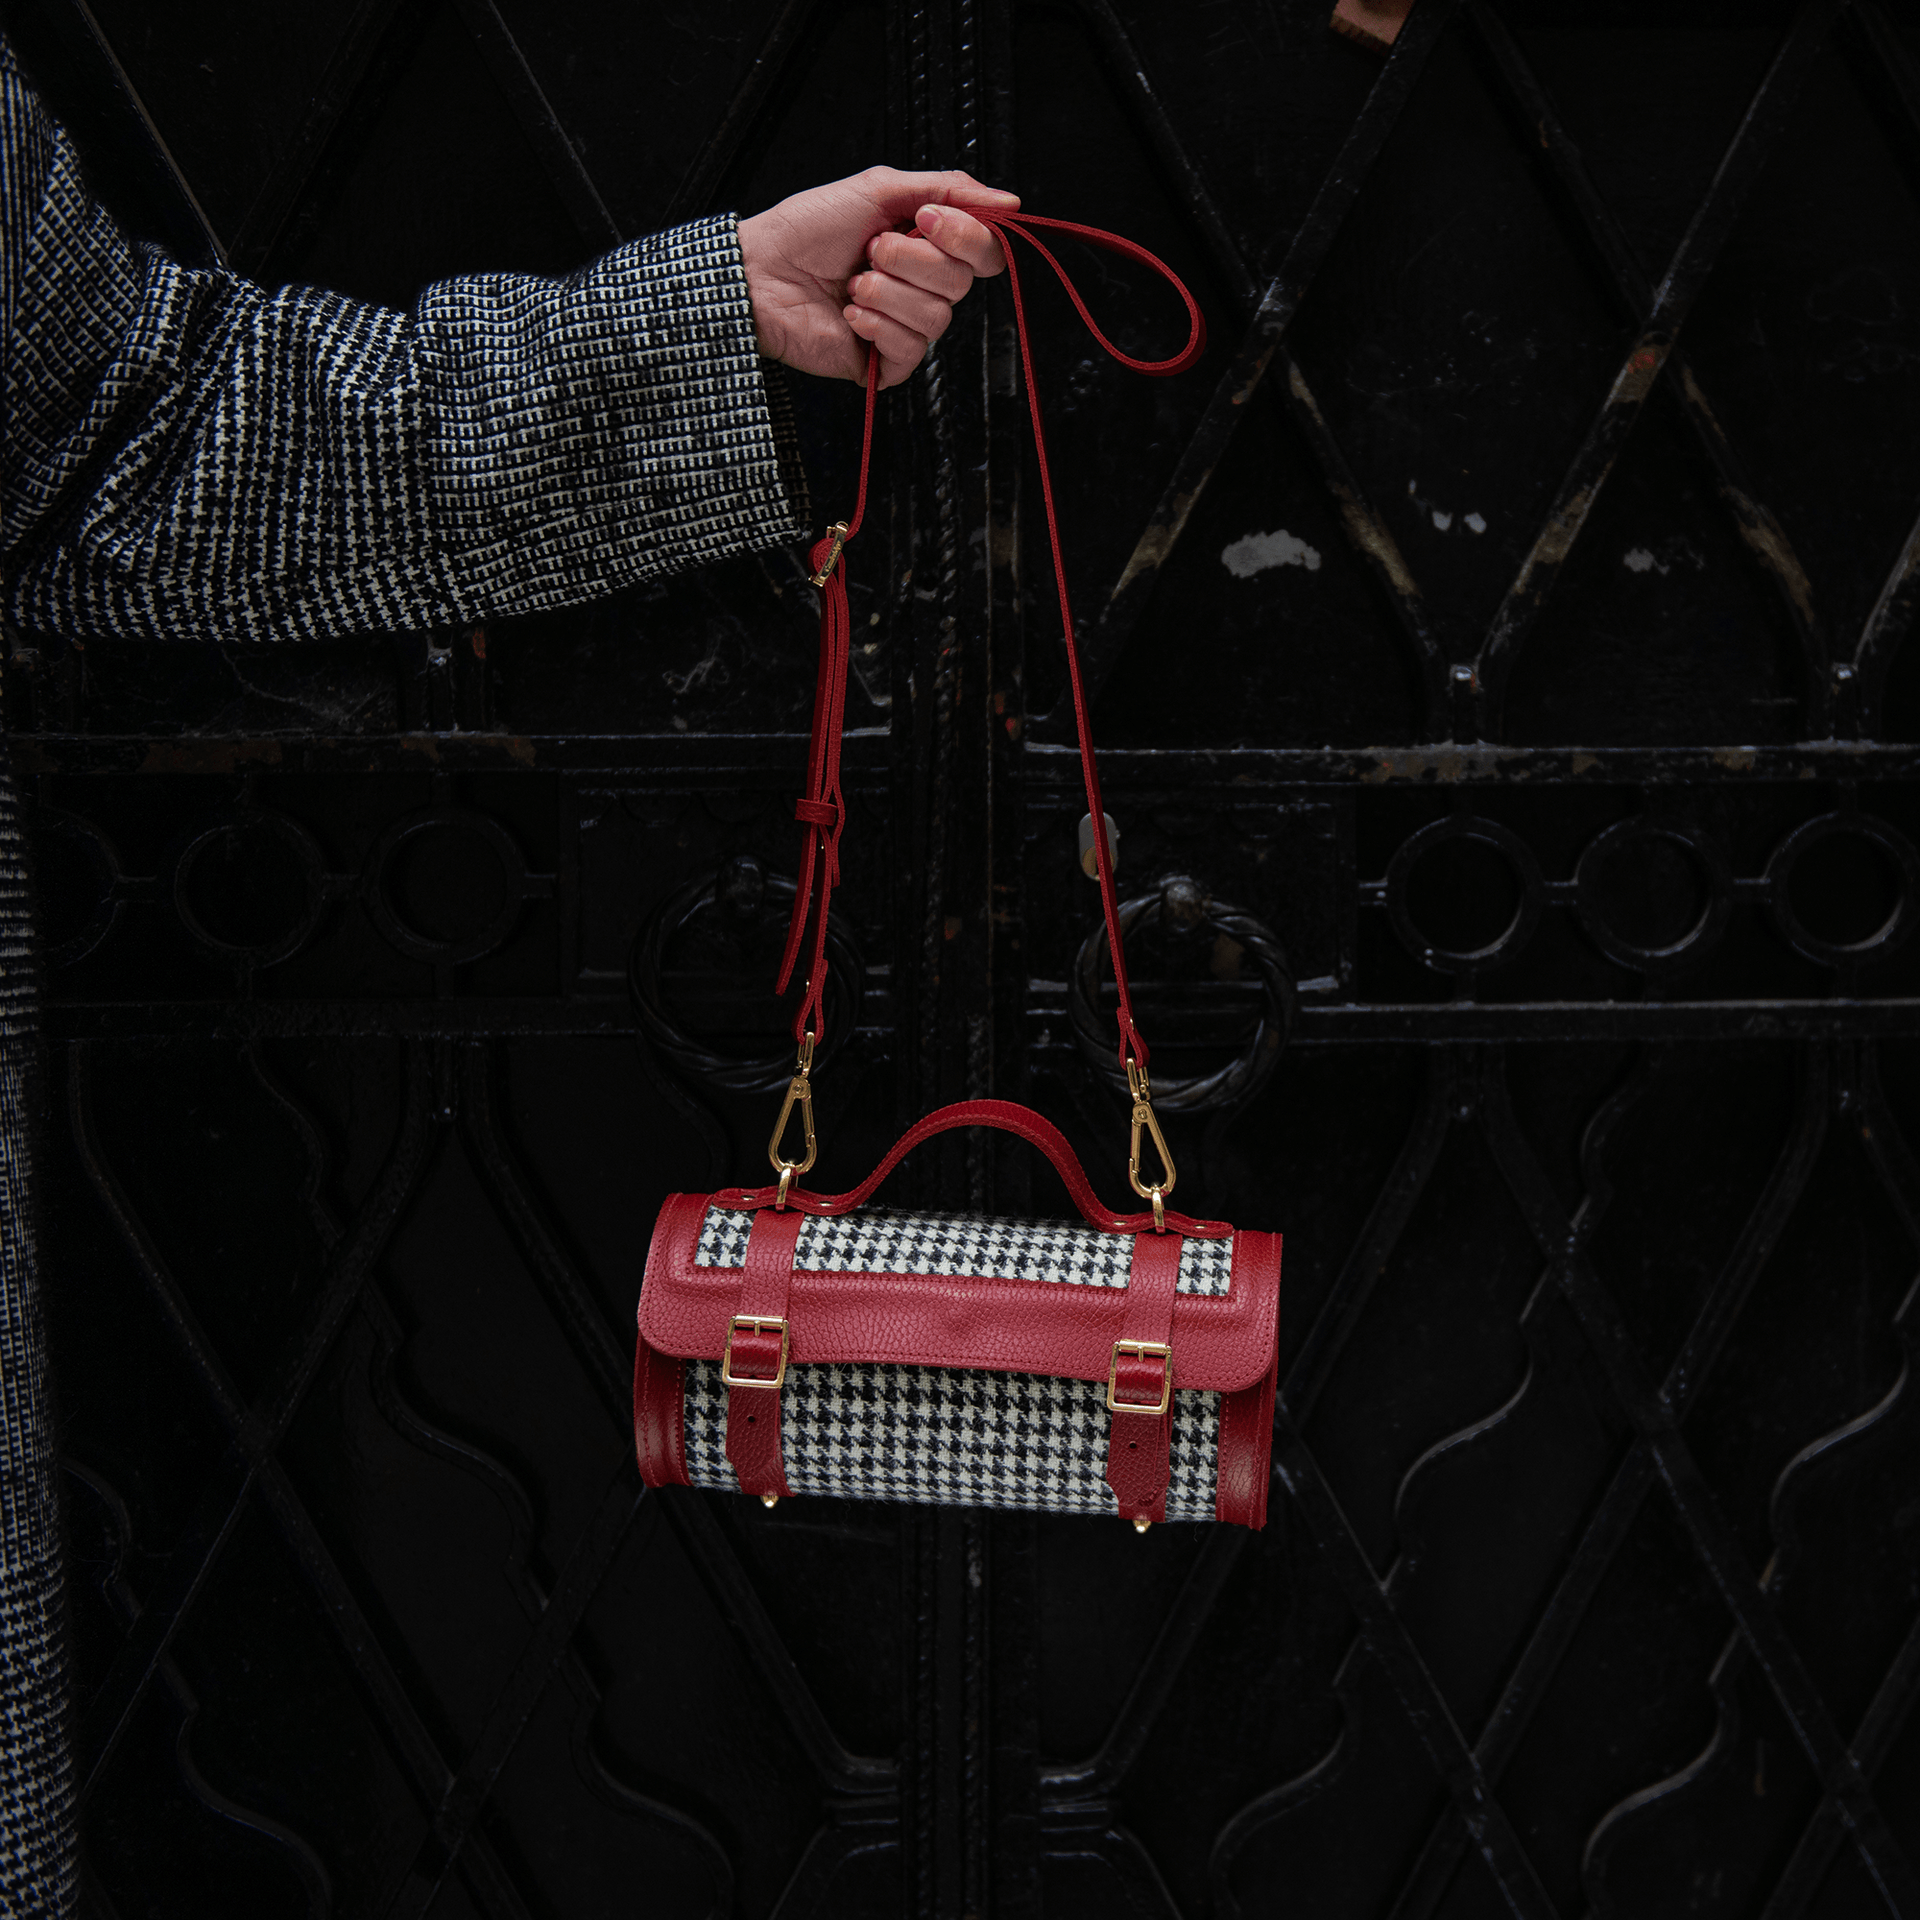 Introducing the Houndstooth Collection - Cambridge Satchel